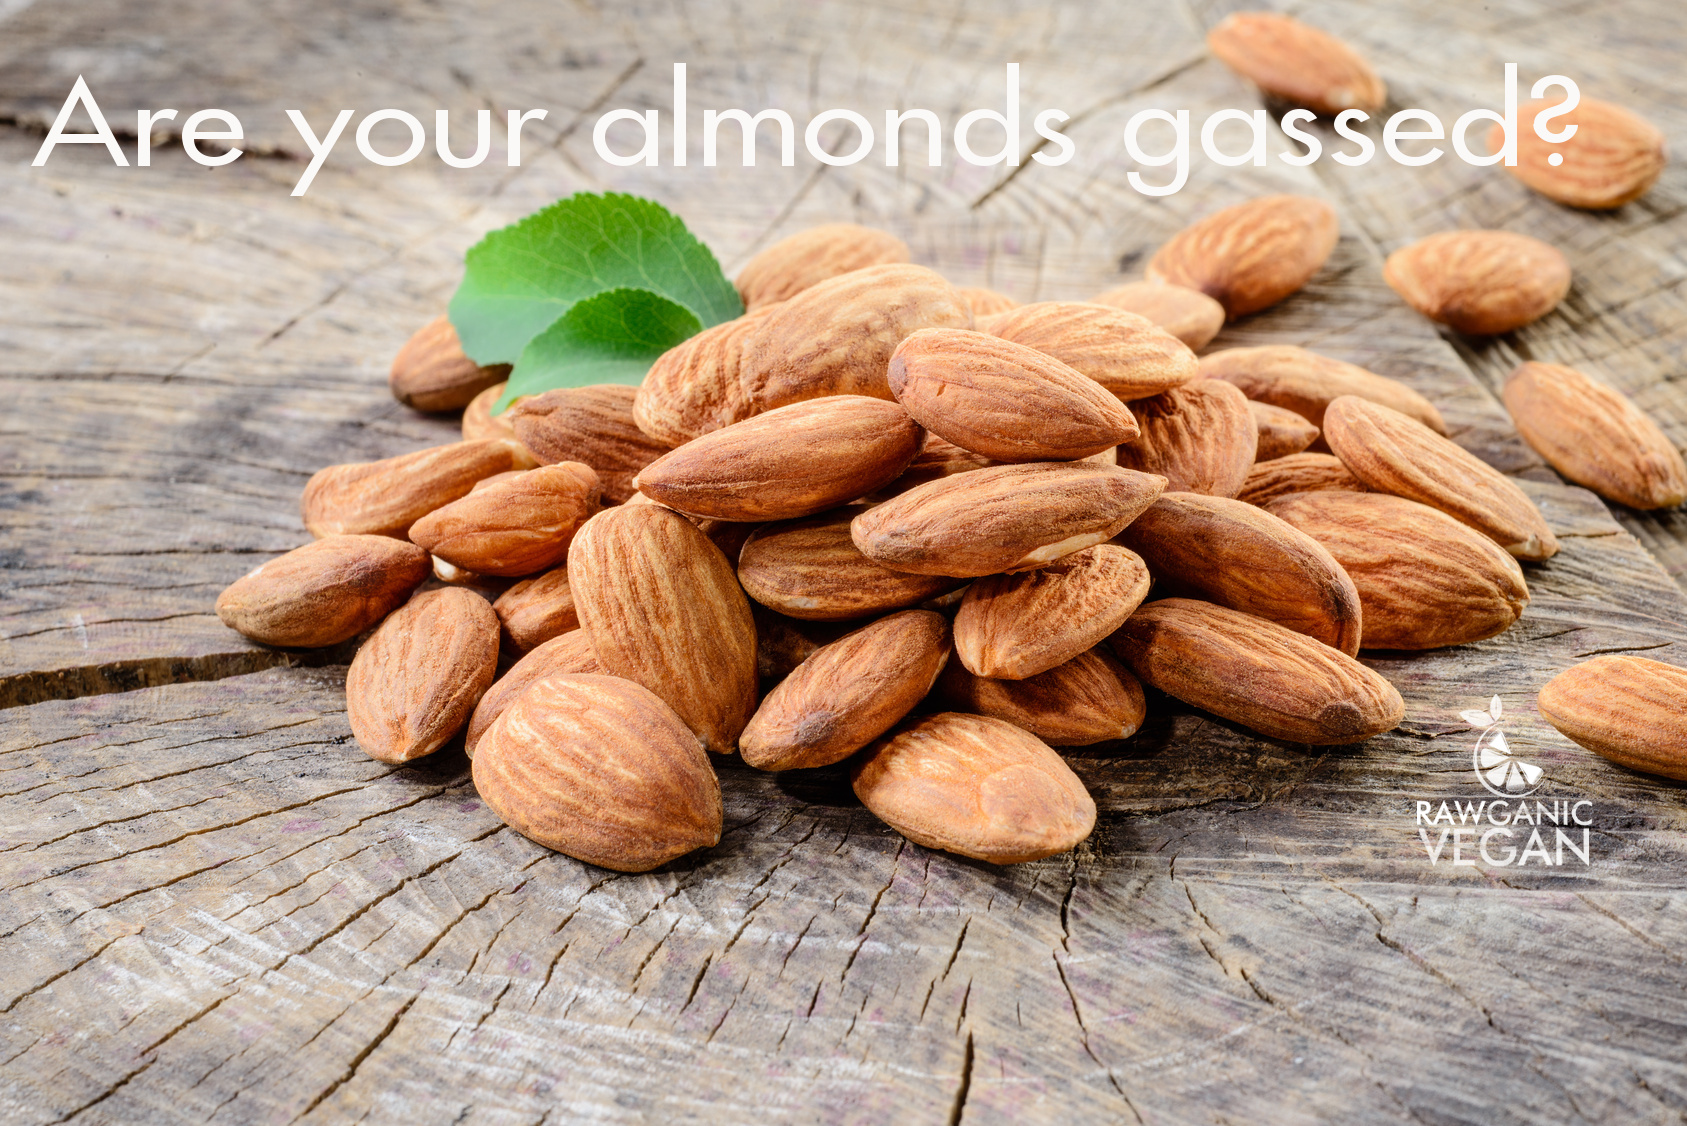 ARE YOU EATING GASSED ALMONDS?